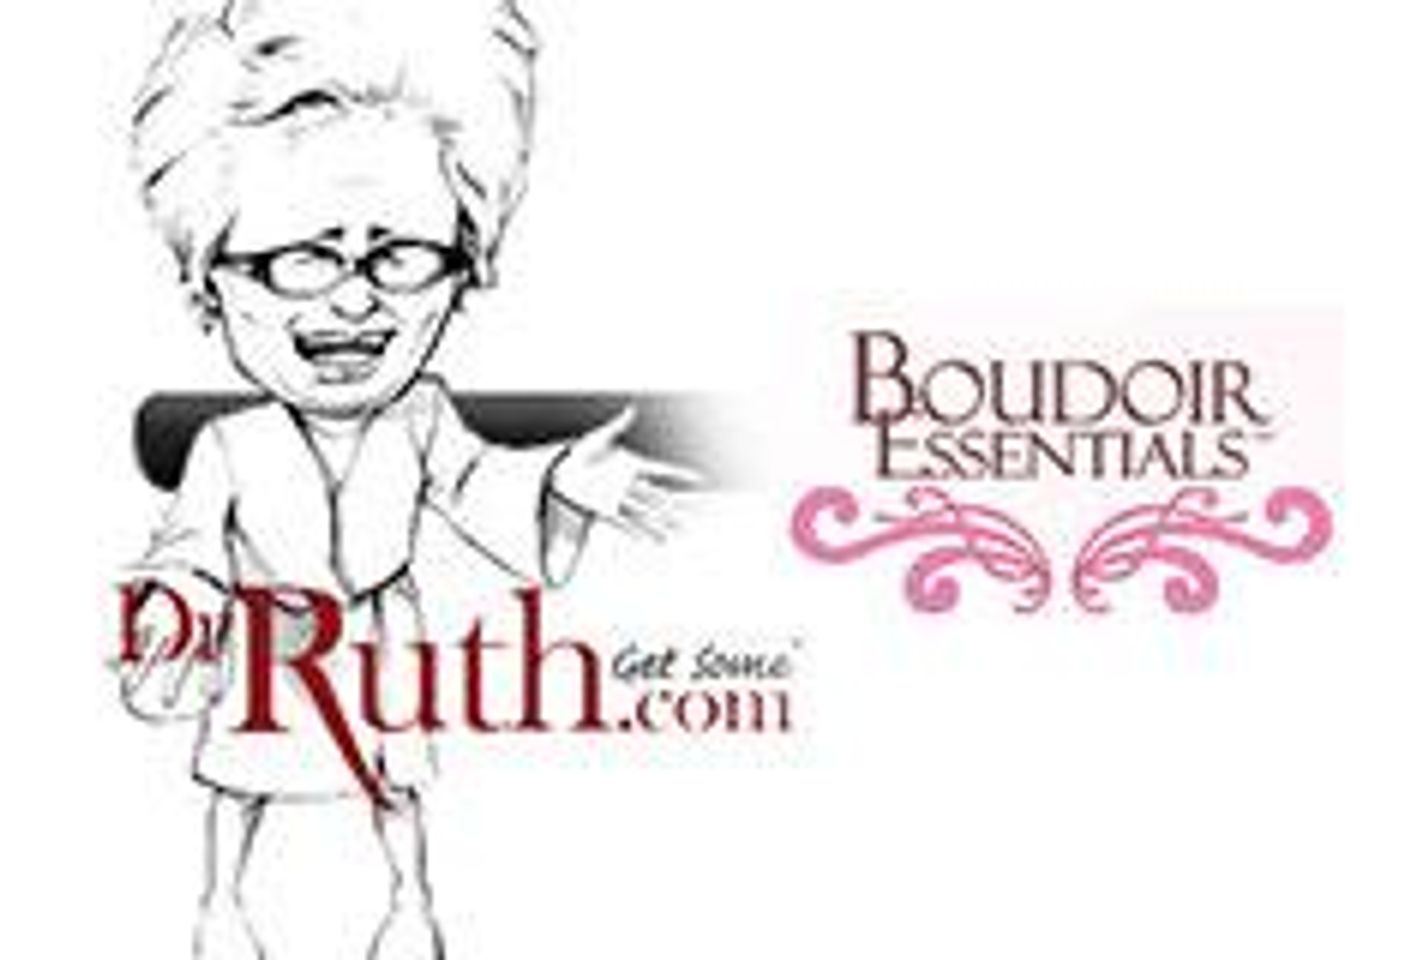 Boudoir Essentials Traffic Surge from Dr.Ruth.com Recognition